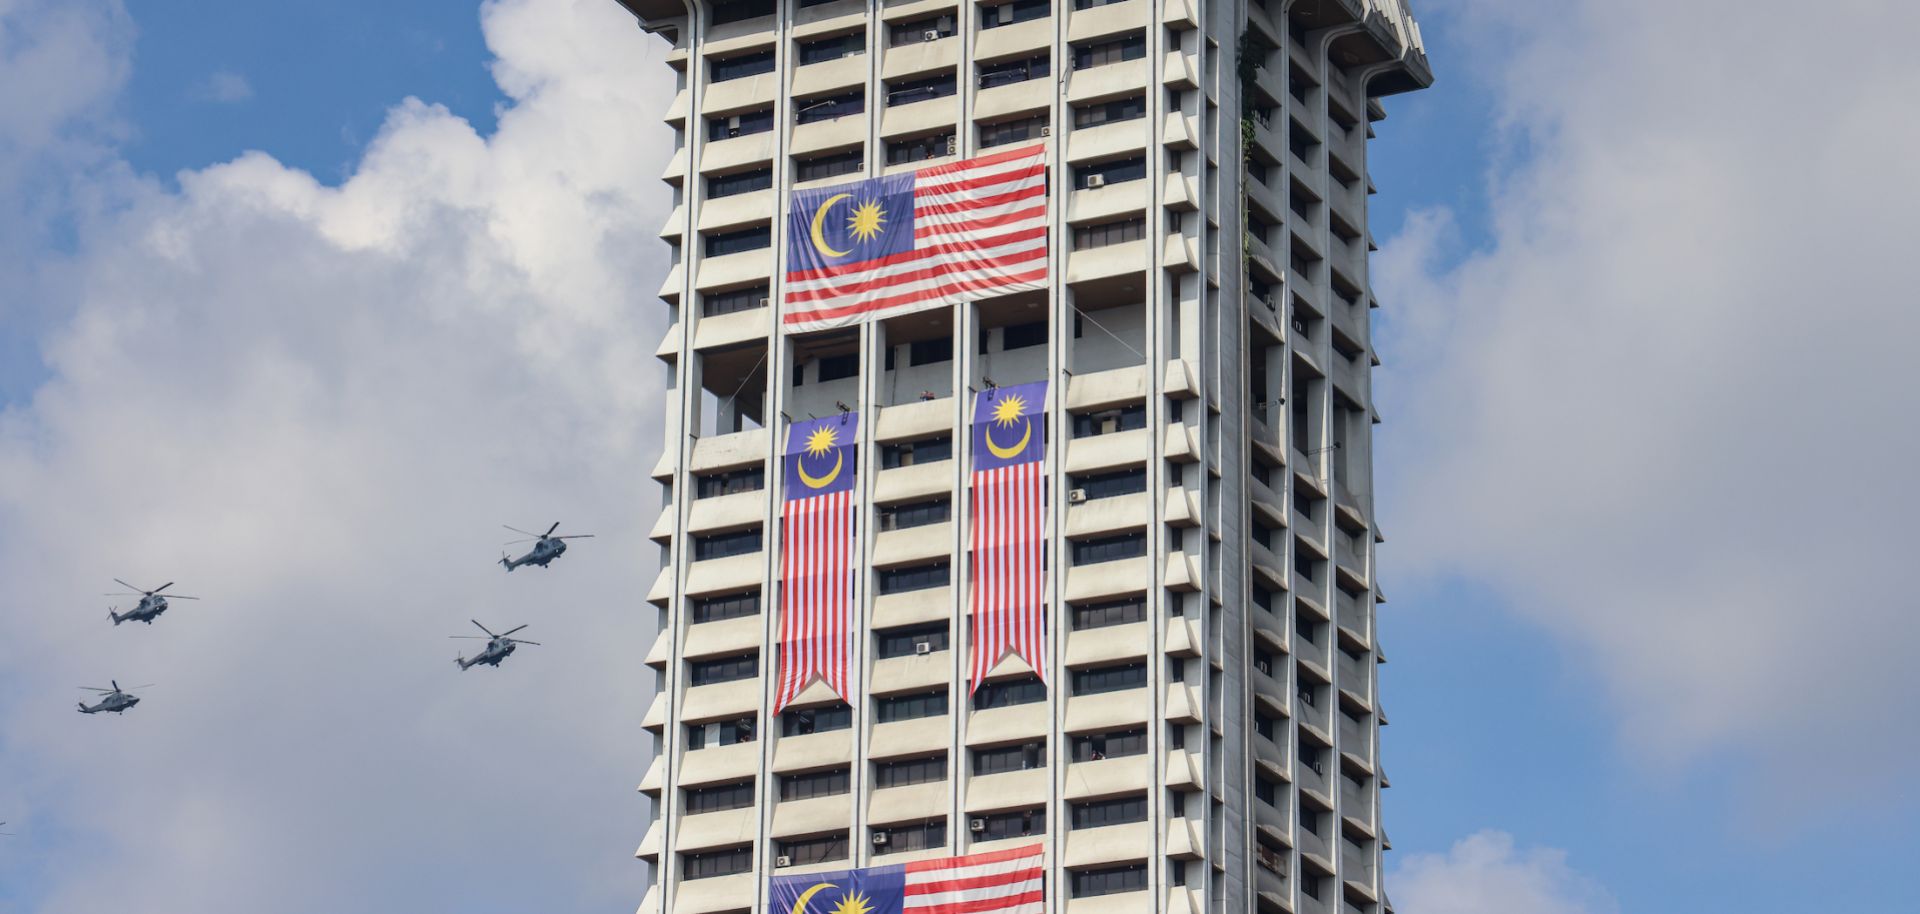 Royal Malaysian Air Force helicopters fly past a building during the 65th National Day parade at Independence Square on Aug. 31, 2022, in Kuala Lumpur, Malaysia. 